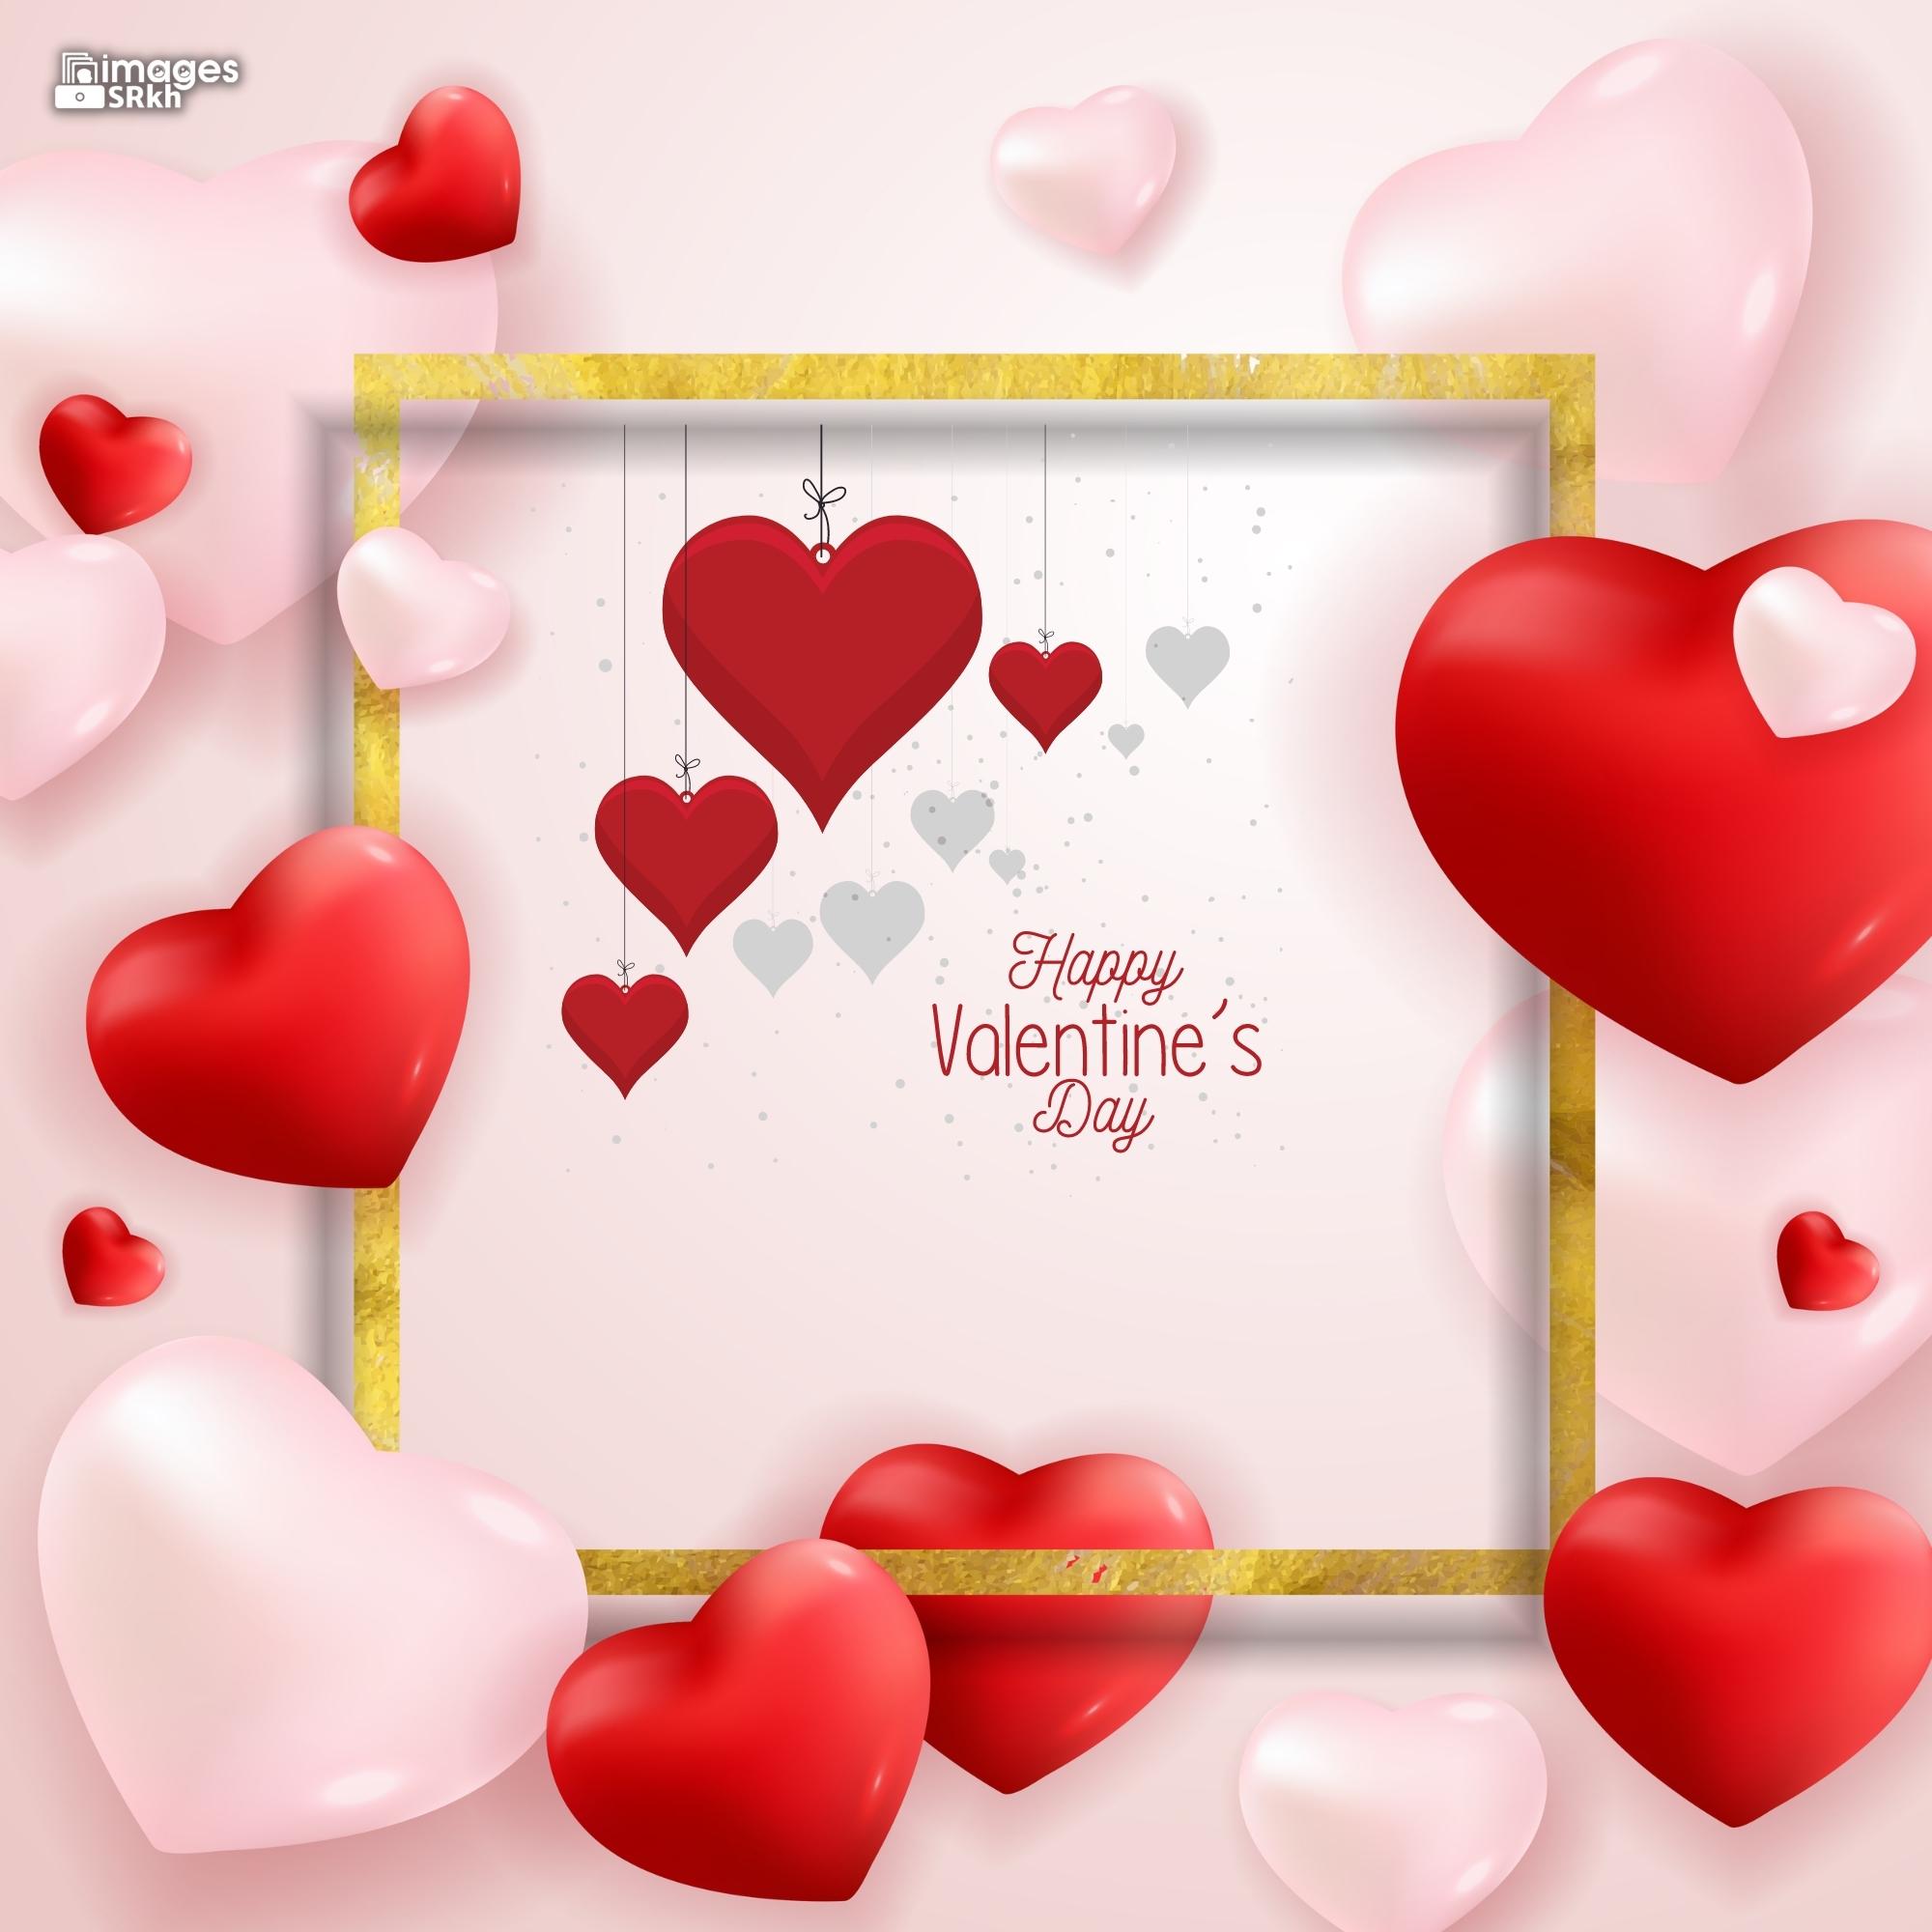 Happy Valentines Day | 460 | PREMIUM IMAGES | Wishes for Love